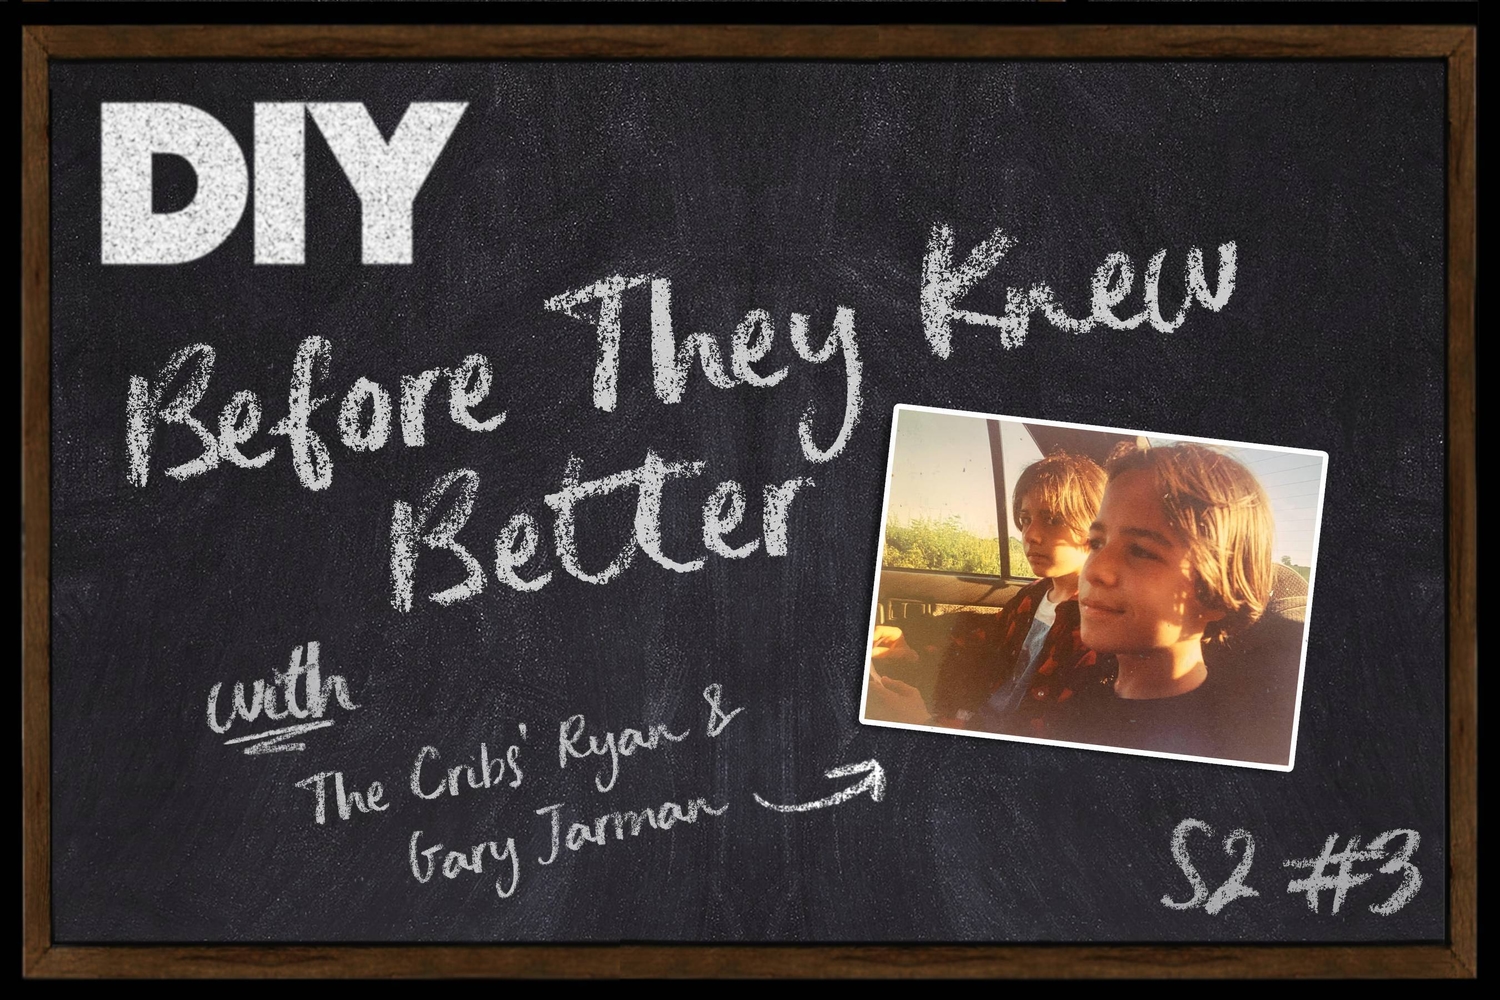 Before They Knew Better welcomes The Cribs’ Ryan and Gary Jarman